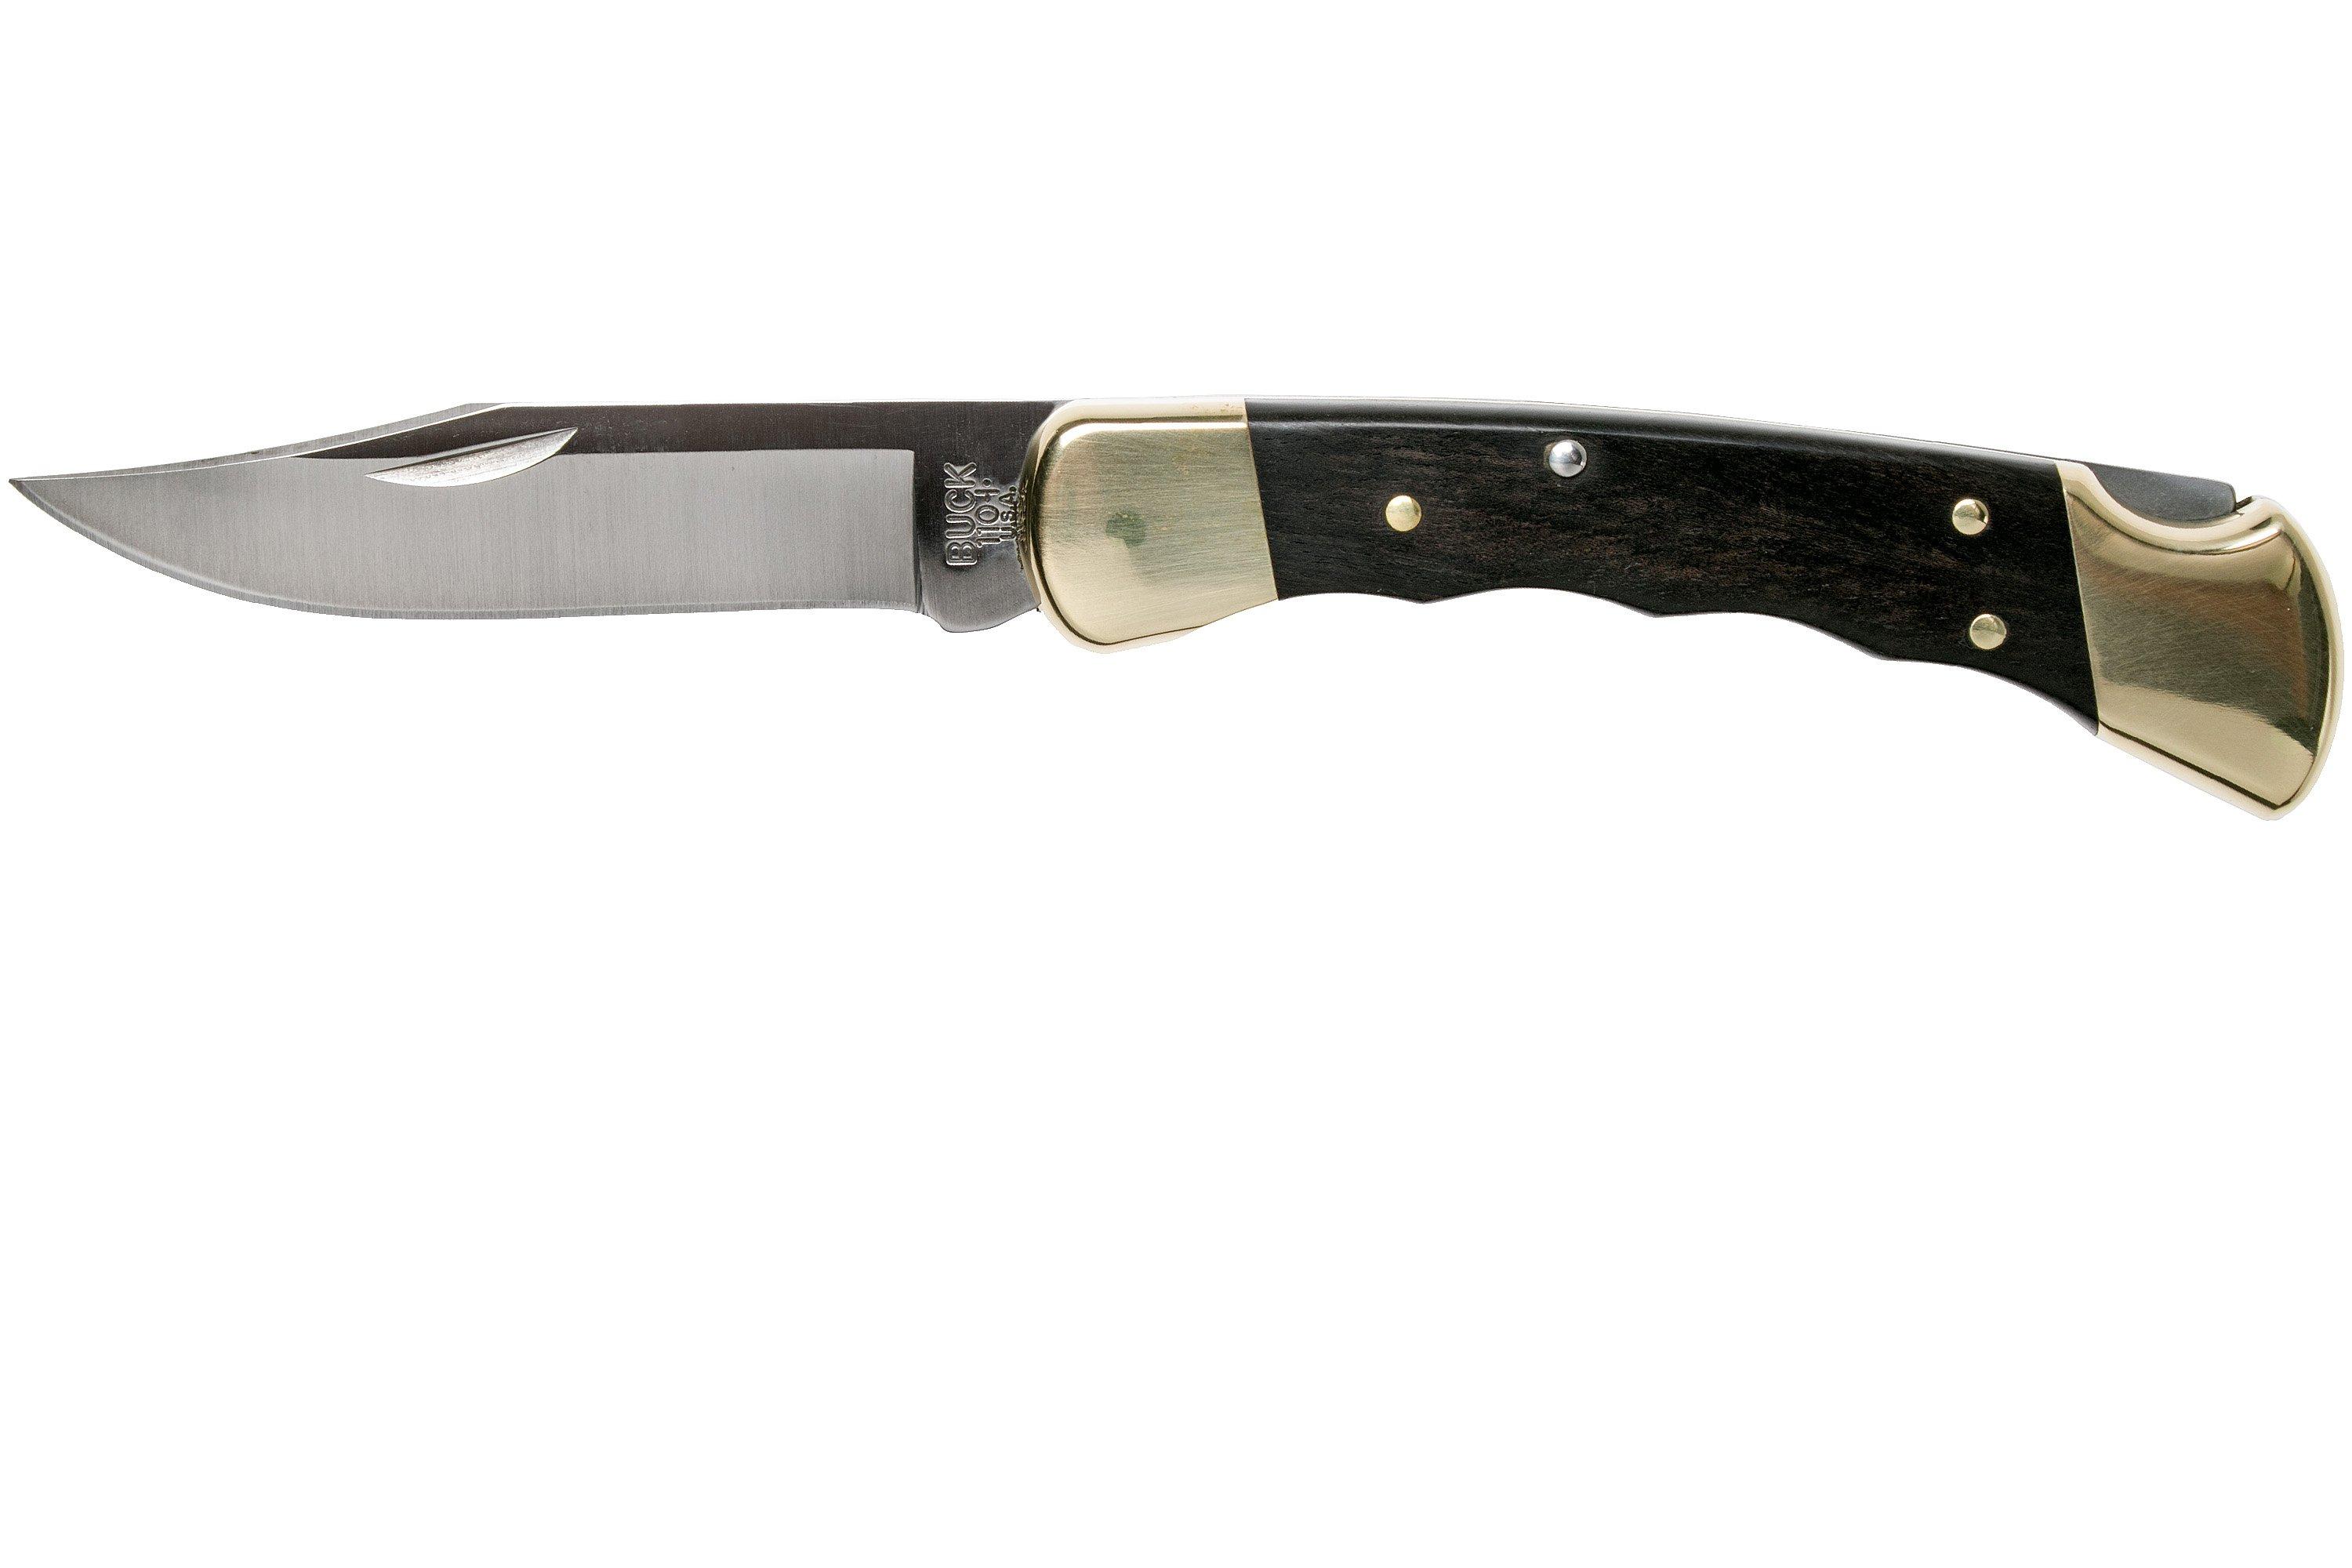 Buck 110 Folding Hunter, with finger grooves  Advantageously shopping at